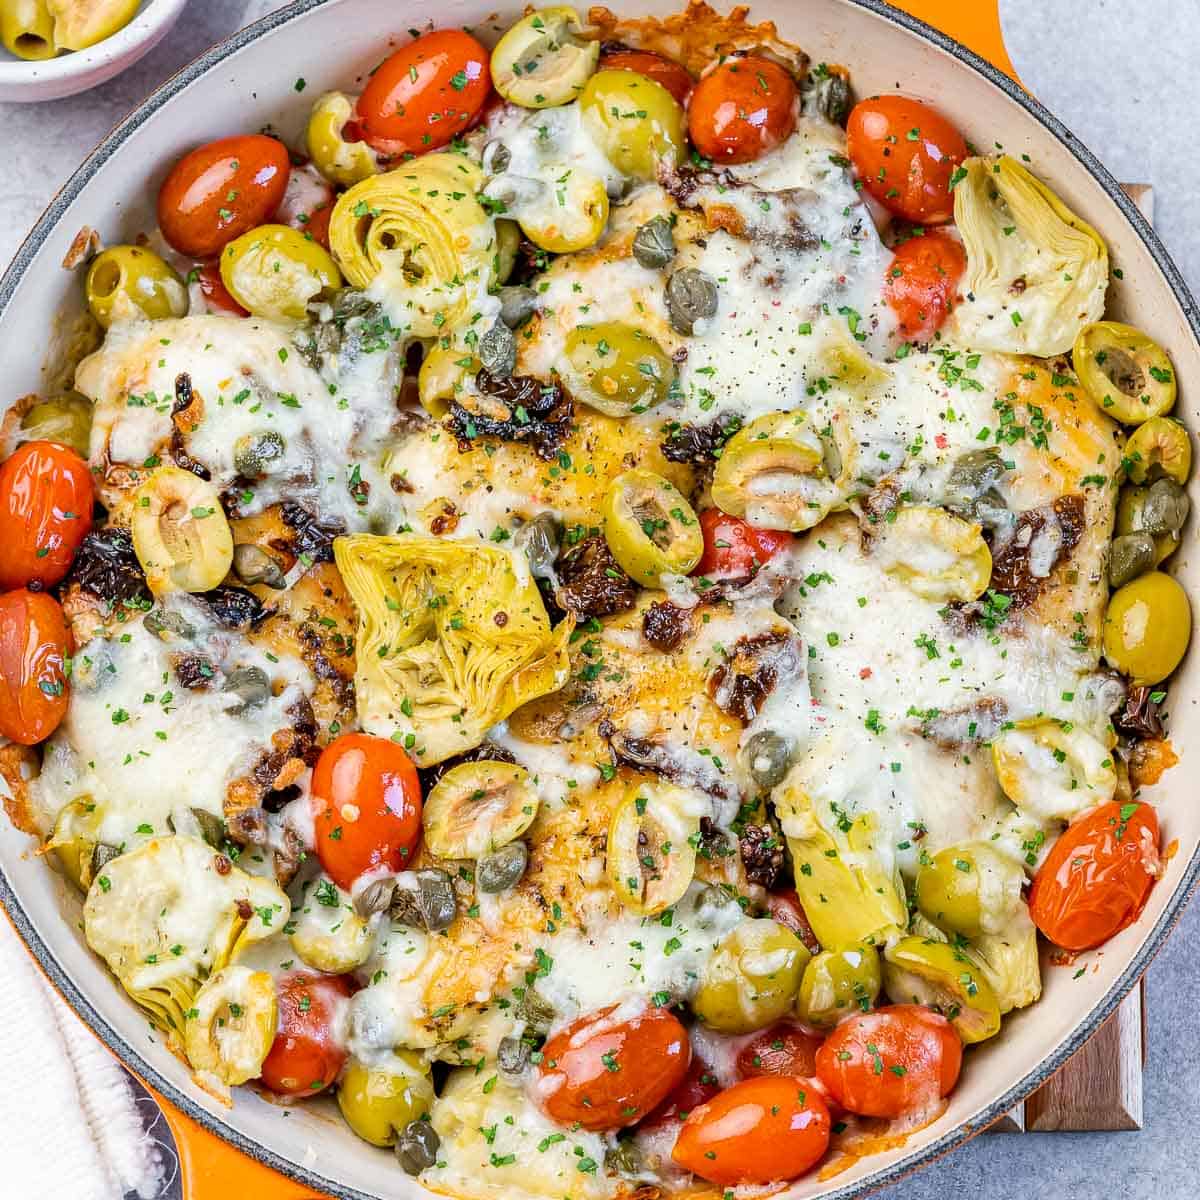 top view of baked chicken breast in a skillet with cherry tomatoes, olives, artichokes and melted cheese